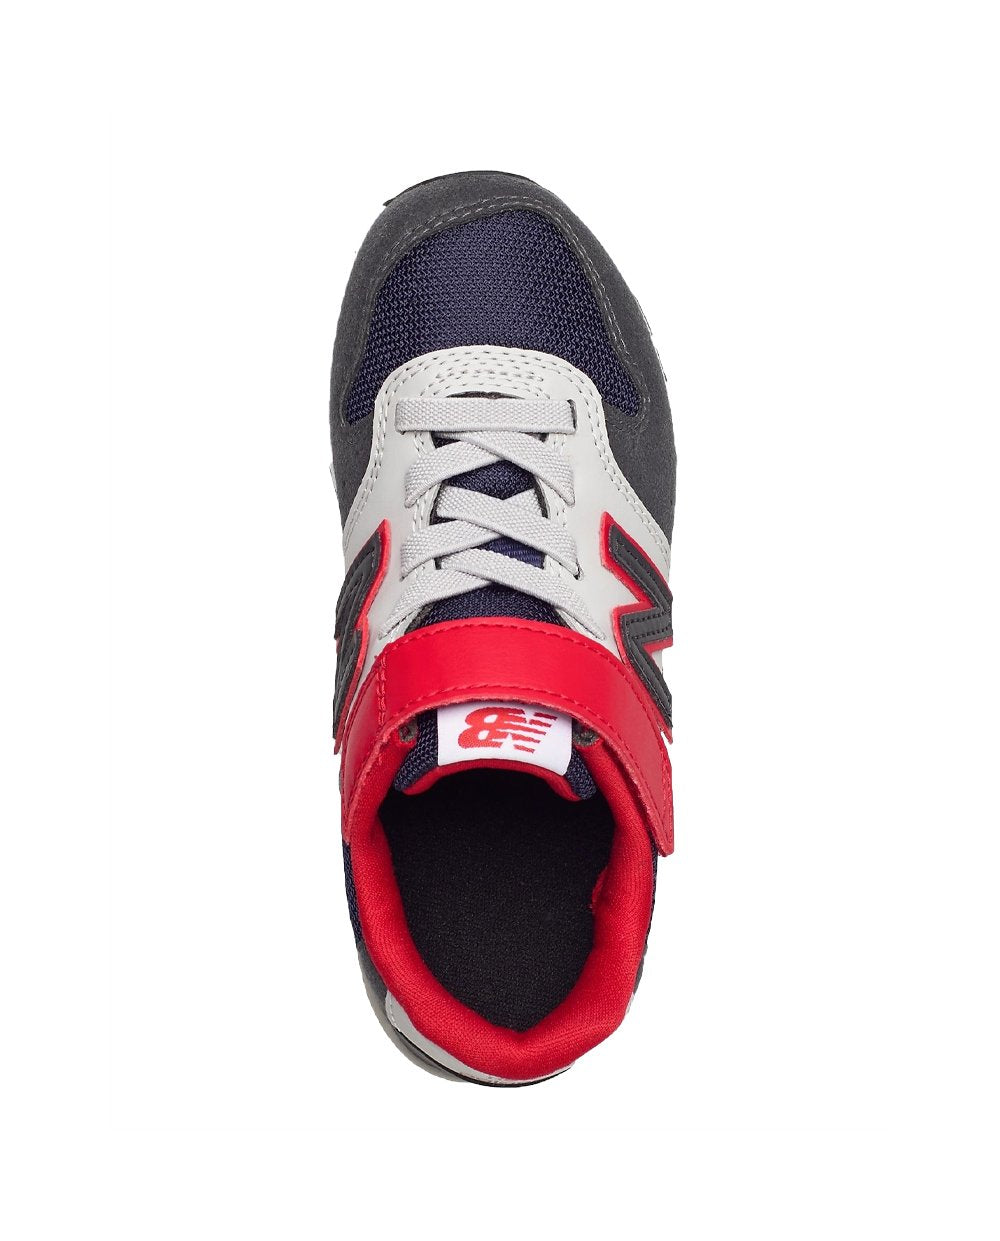 New Balance 996 Grey with Navy Blue and Red